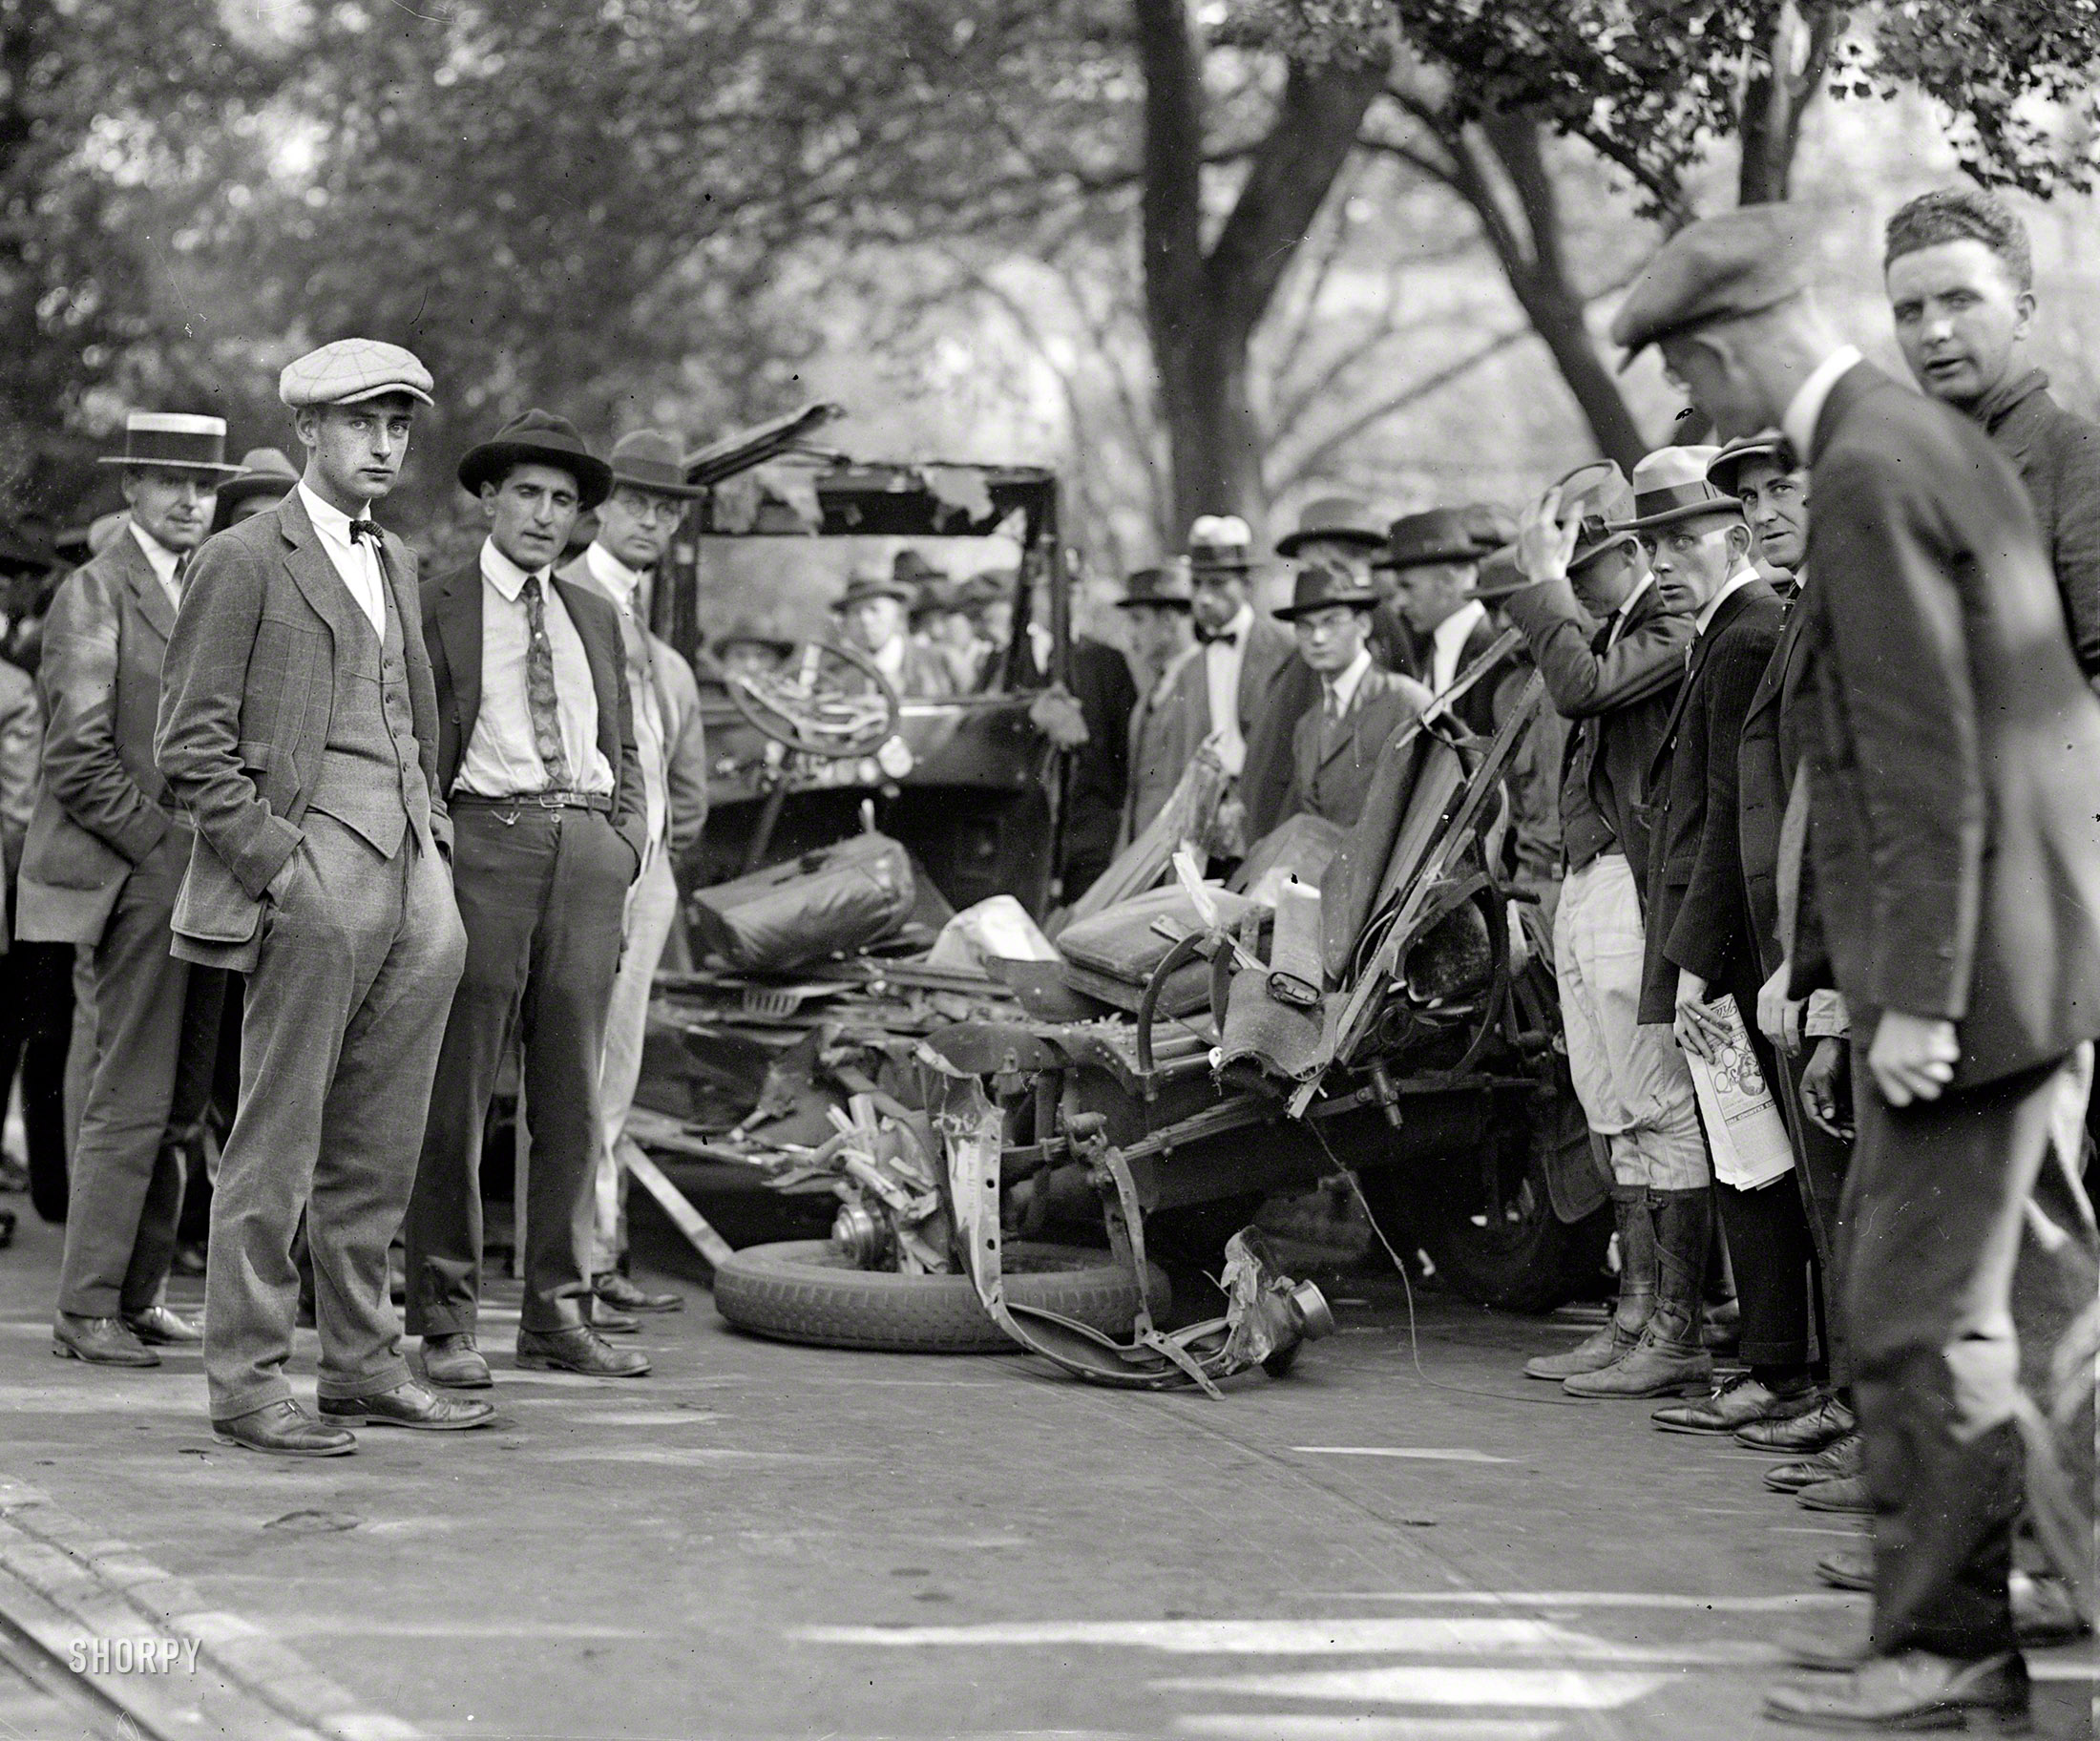 1923. Assistant Postmaster General John Bartlett's car in Washington after an accident. Bartlett, a former governor of New Hampshire, survived. Details of the wreck, unfortunately, did not. View full size. National Photo Co. Collection.